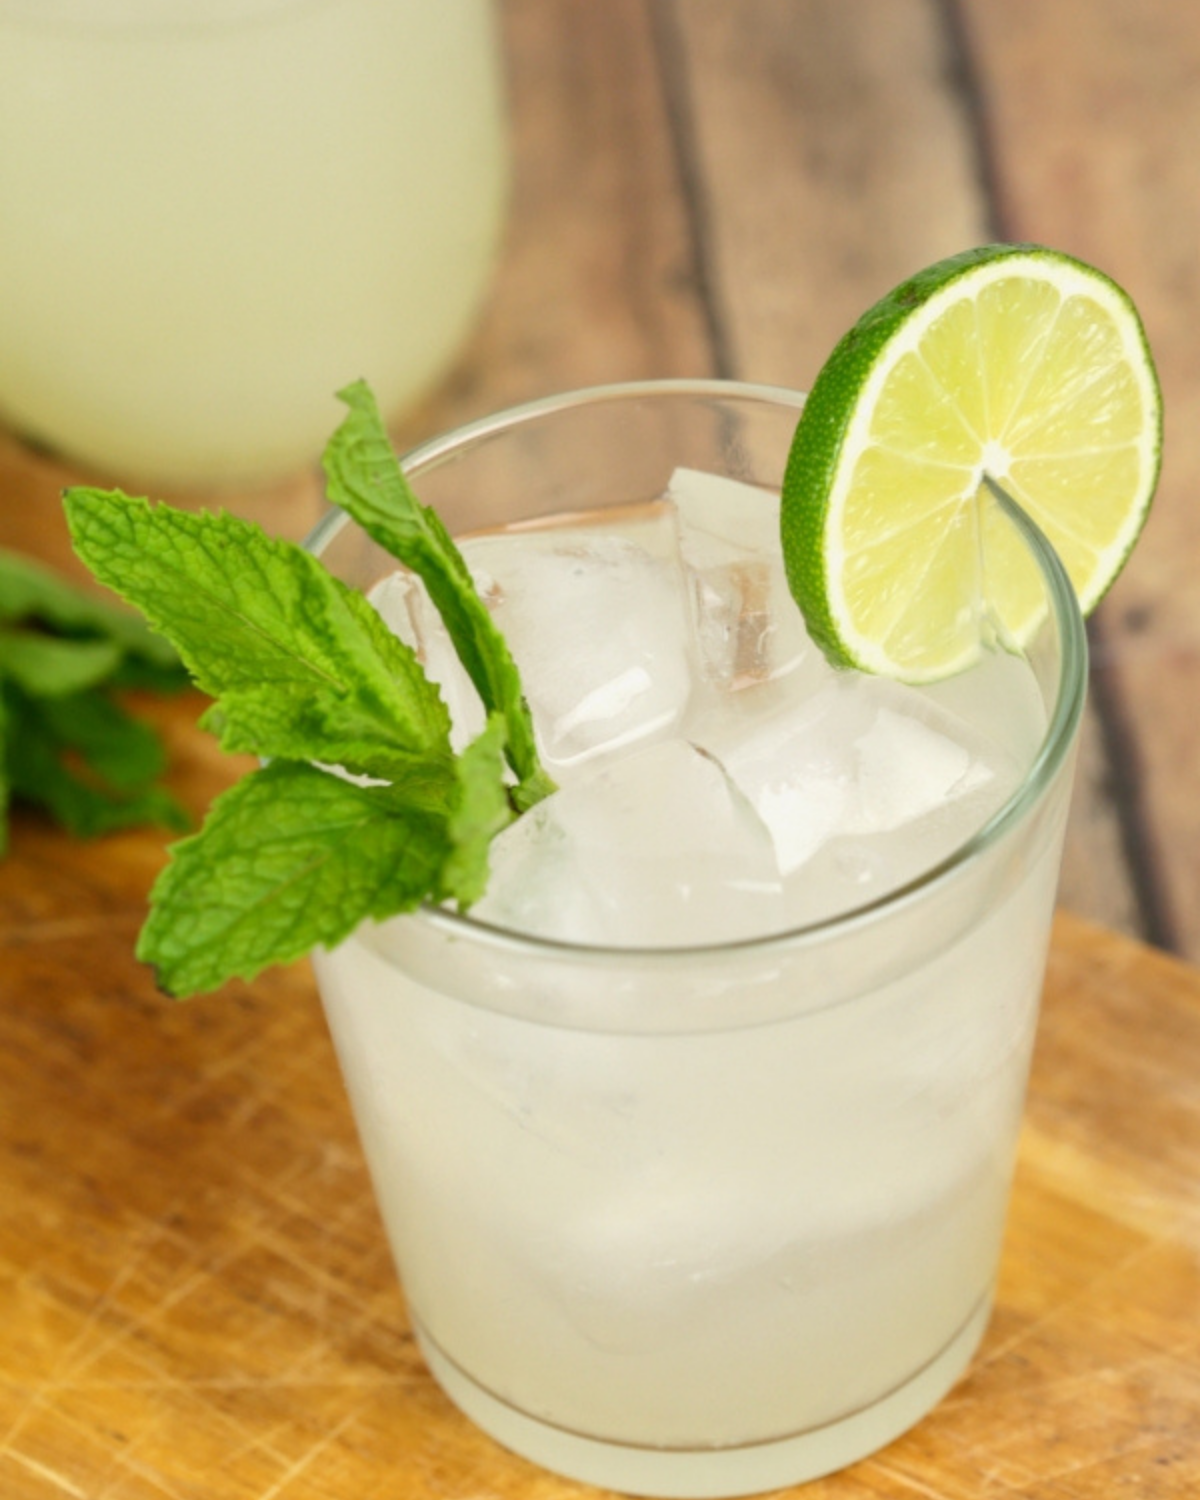 Mojito flavored moonshine in a glass with a mint sprig and lime.